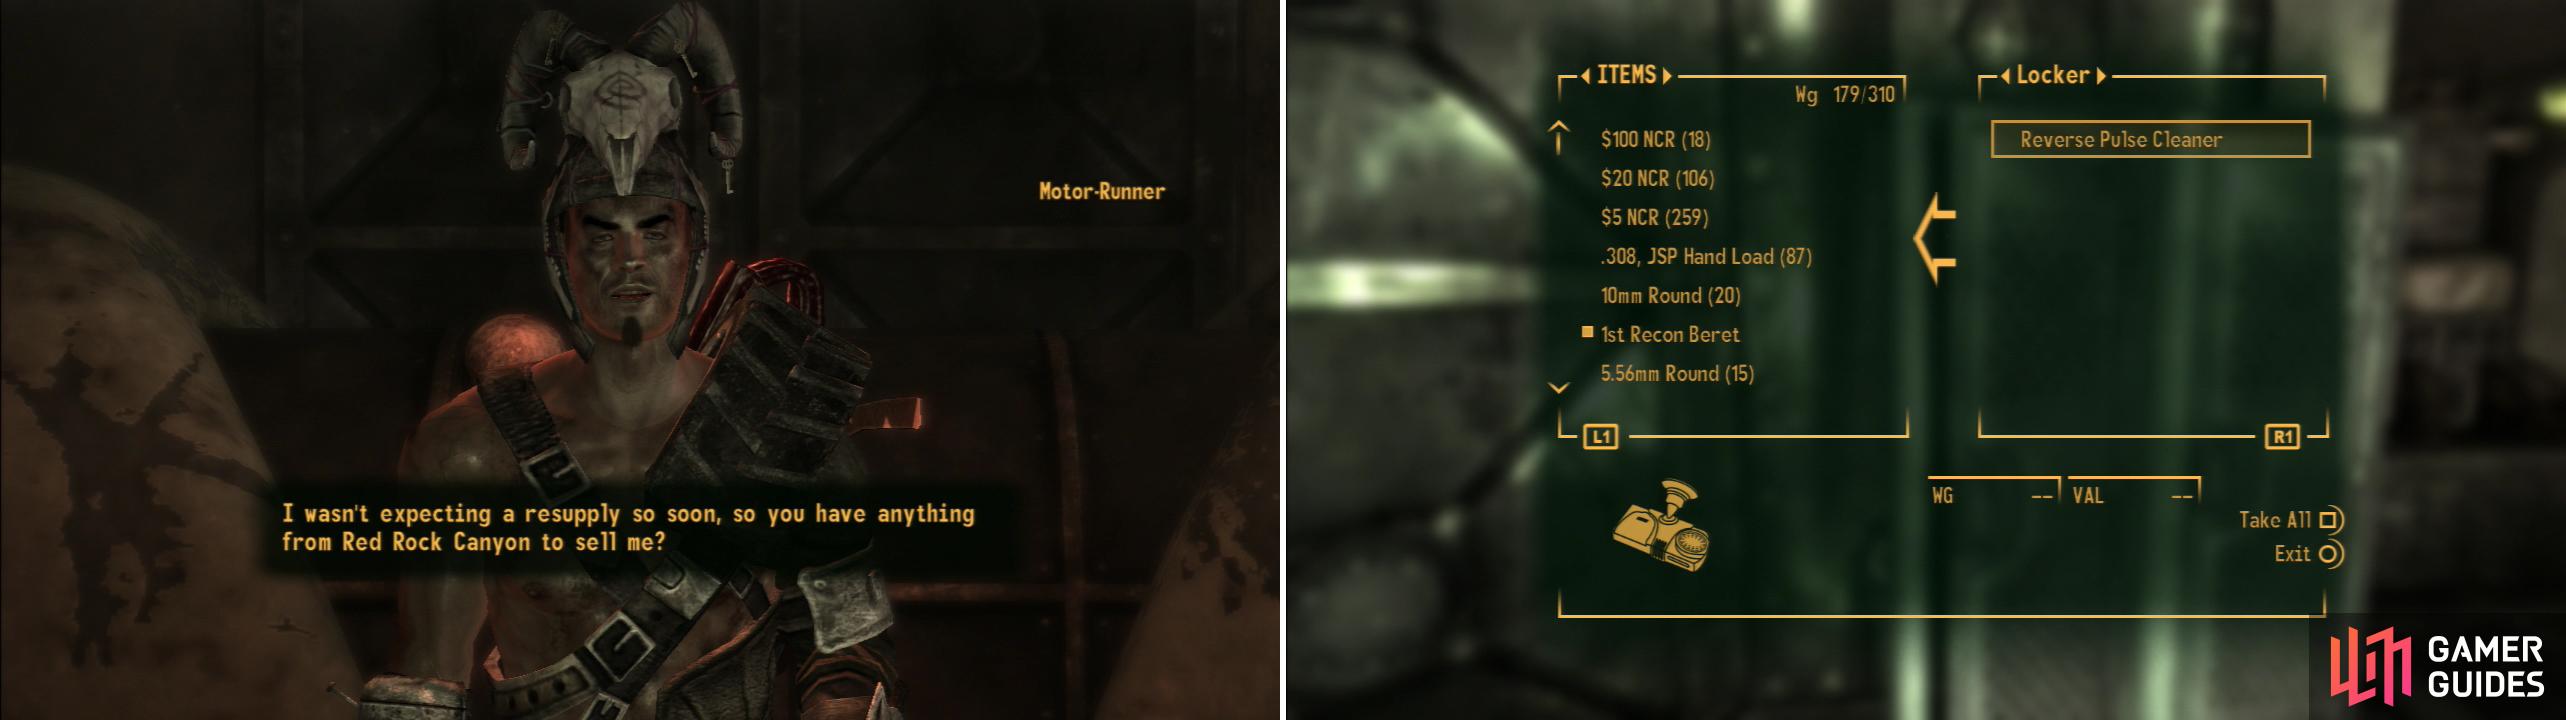 At the bottom of Vault 3 you’ll find Motor-Runner, the leader of the Fiends (left). More importantly, you can obtain the Reverse Pulse Cleaner (right).